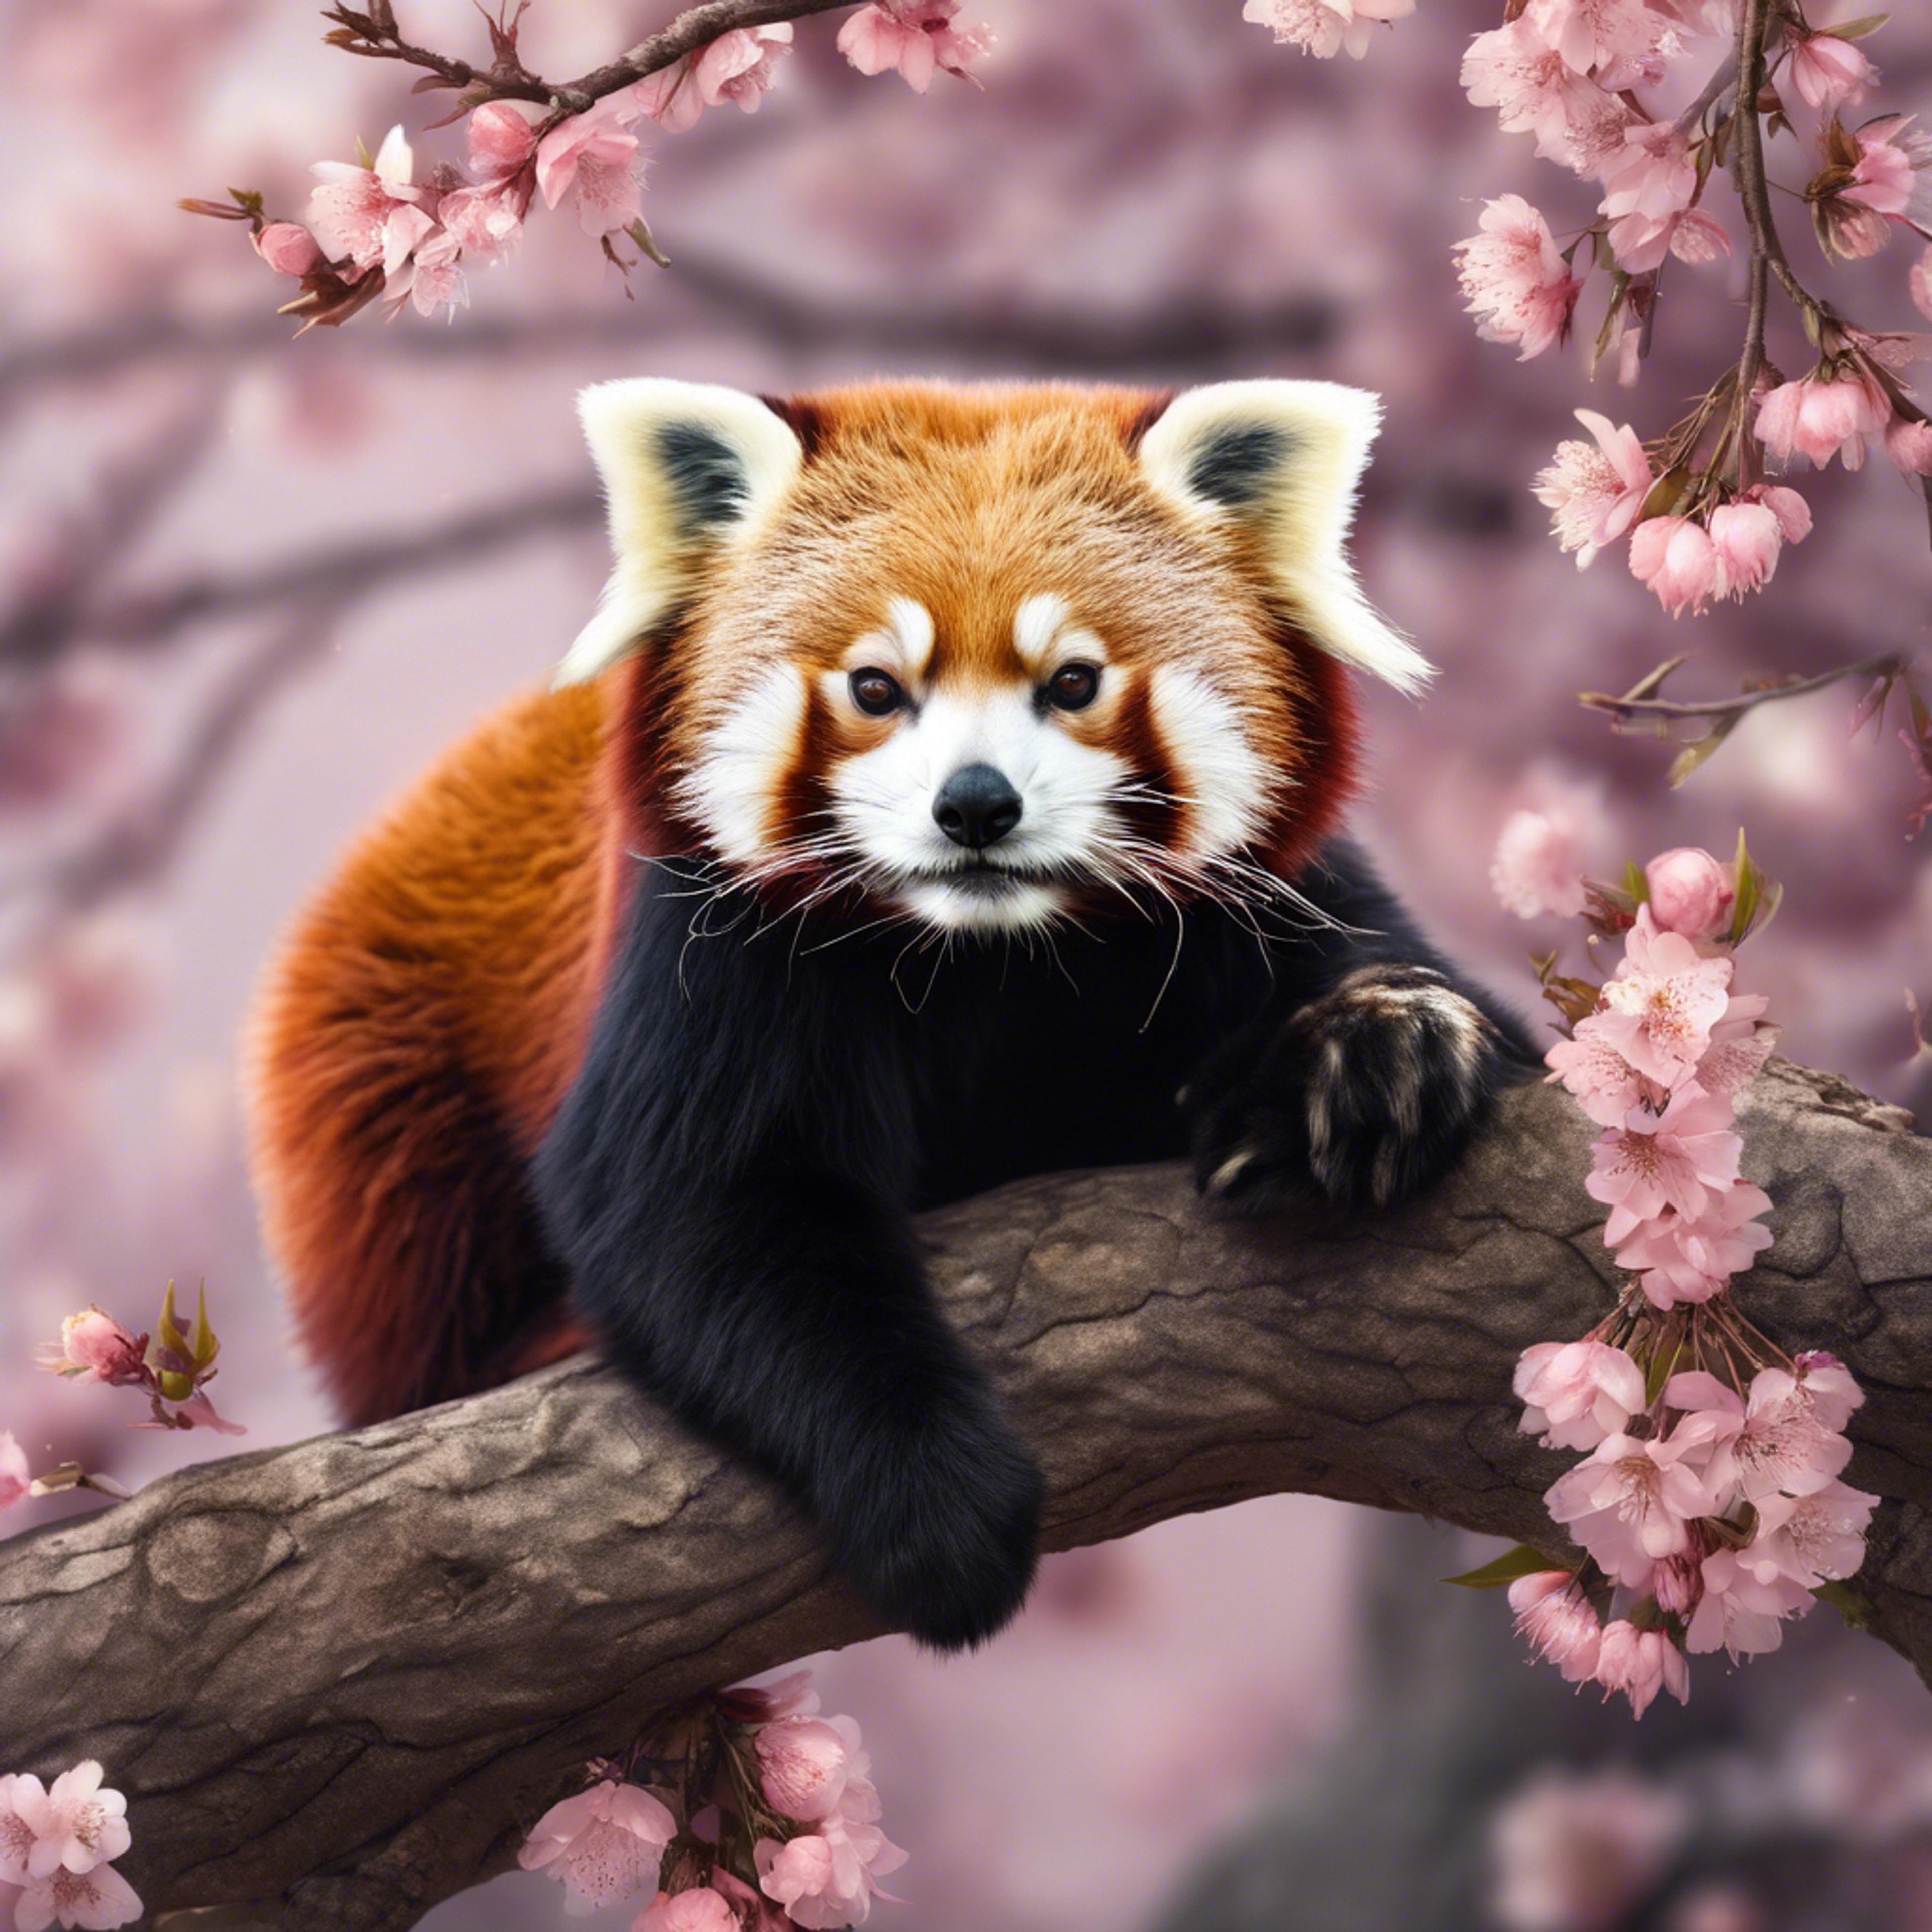 A red panda lounging lazily on a tree branch with a backdrop of blooming cherry blossoms. Tapeta[422b6dc9464b43ba80b6]